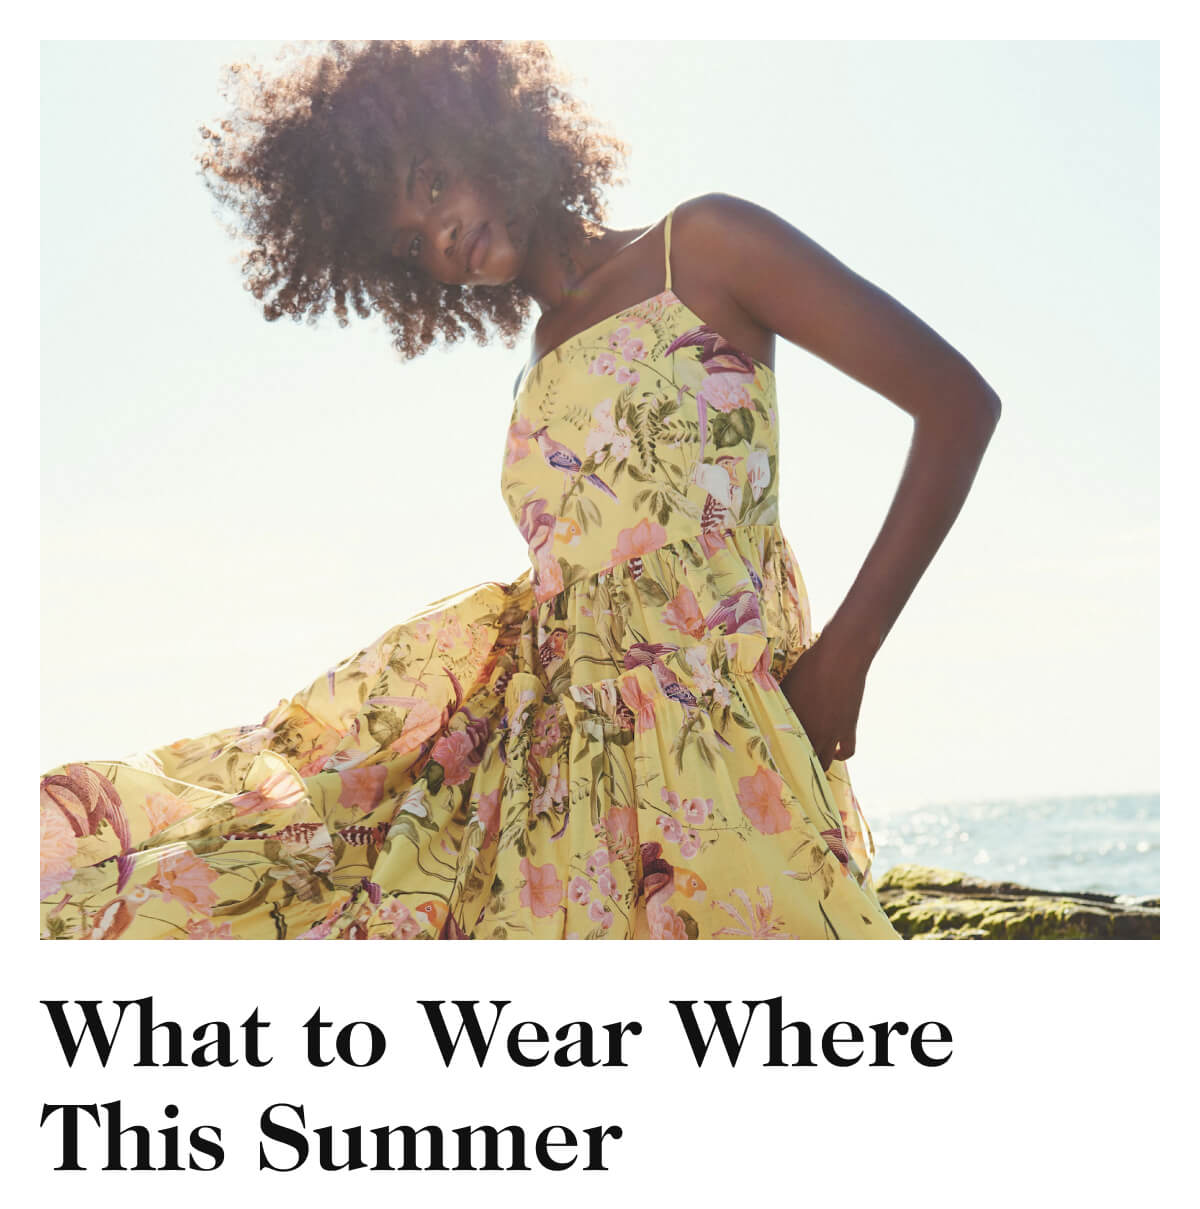 What to Wear Where This Summer